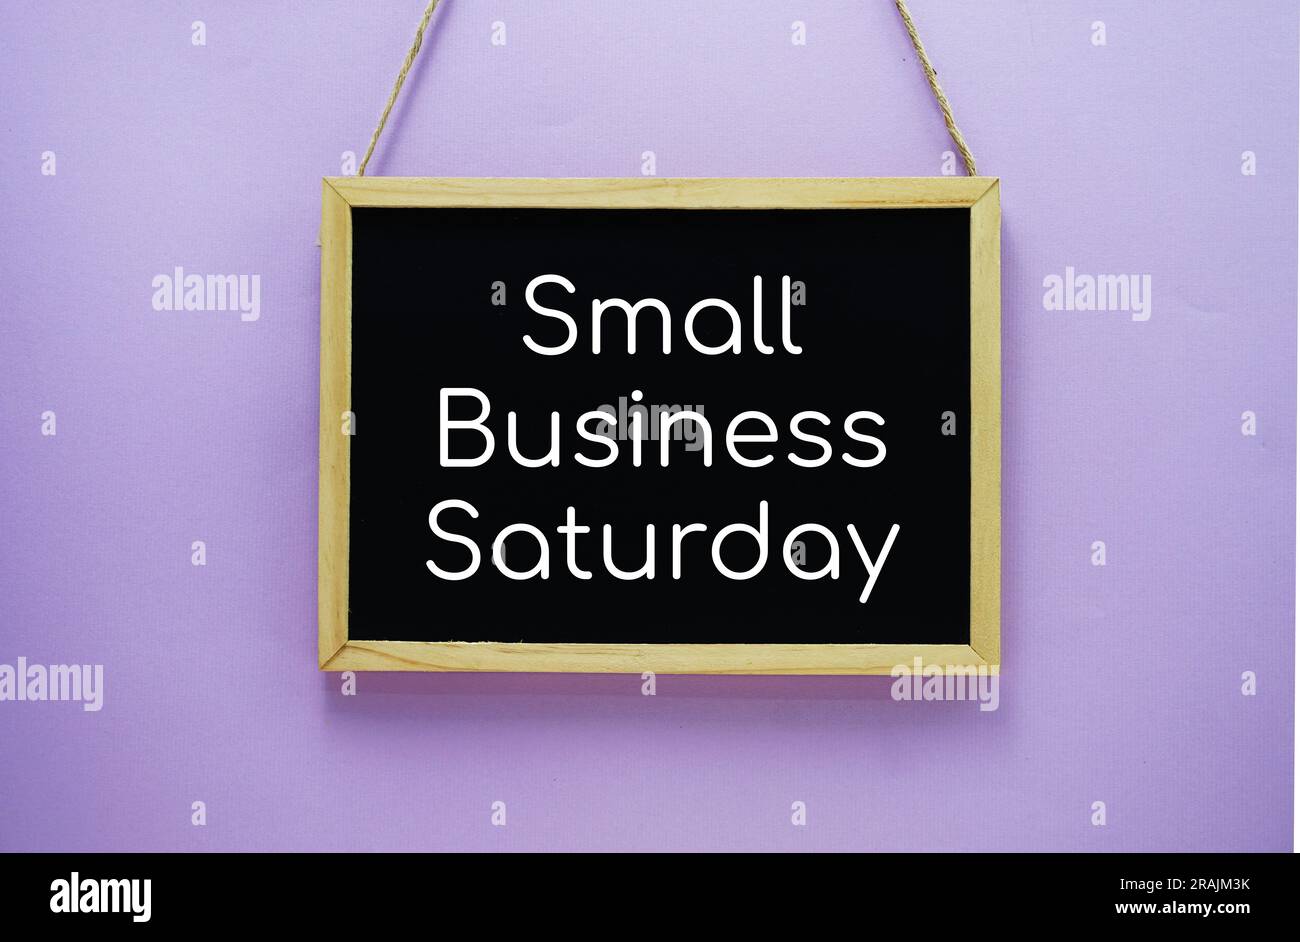 Small Business Saturday typography text on wooden blackboard hanging on purple background Stock Photo